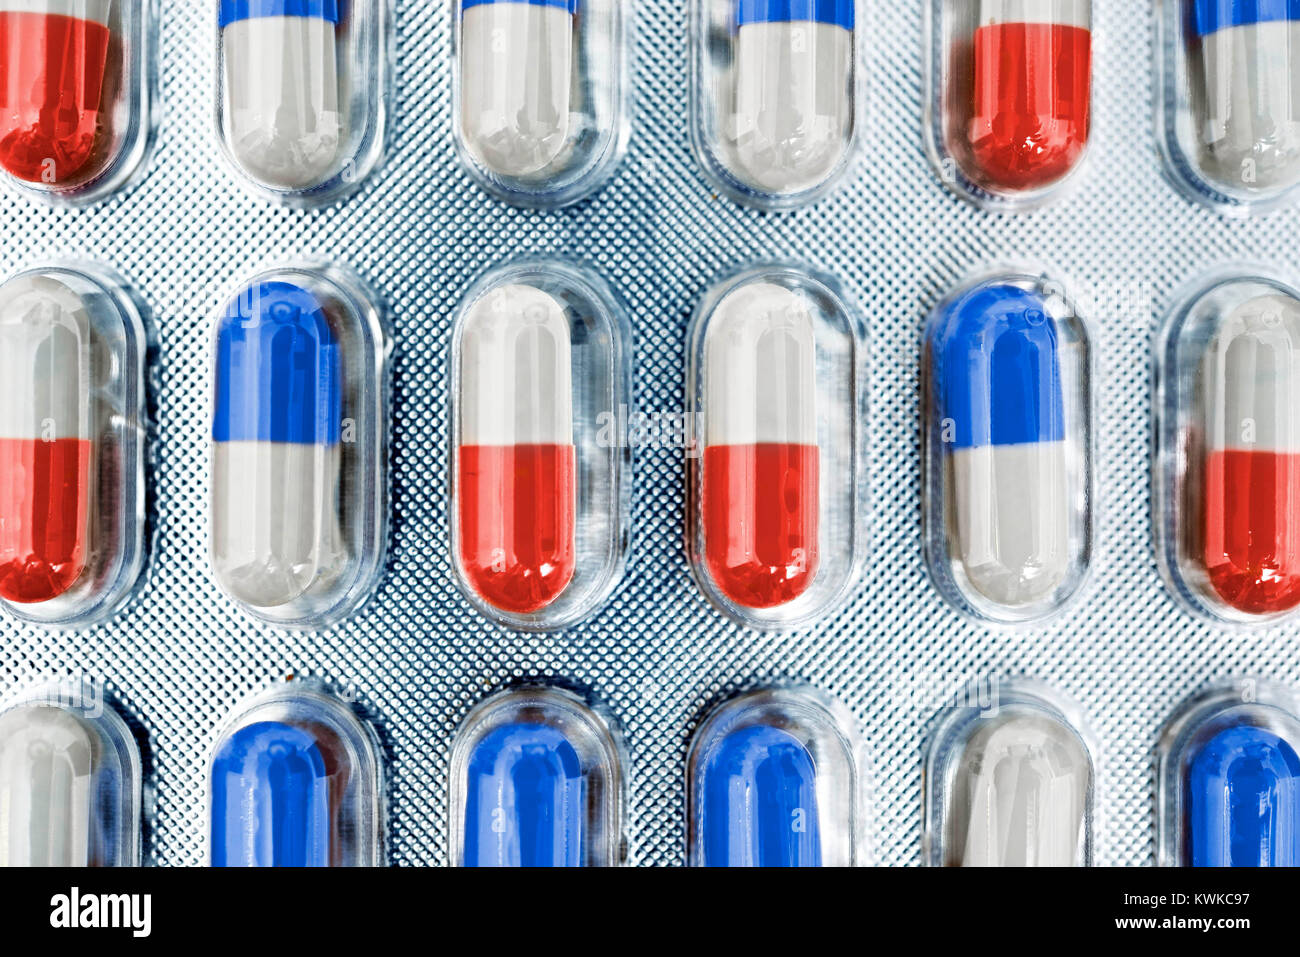 Tablets in Russian national colours, doping scandal, Tabletten in russischen Nationalfarben, Doping-Skandal Stock Photo